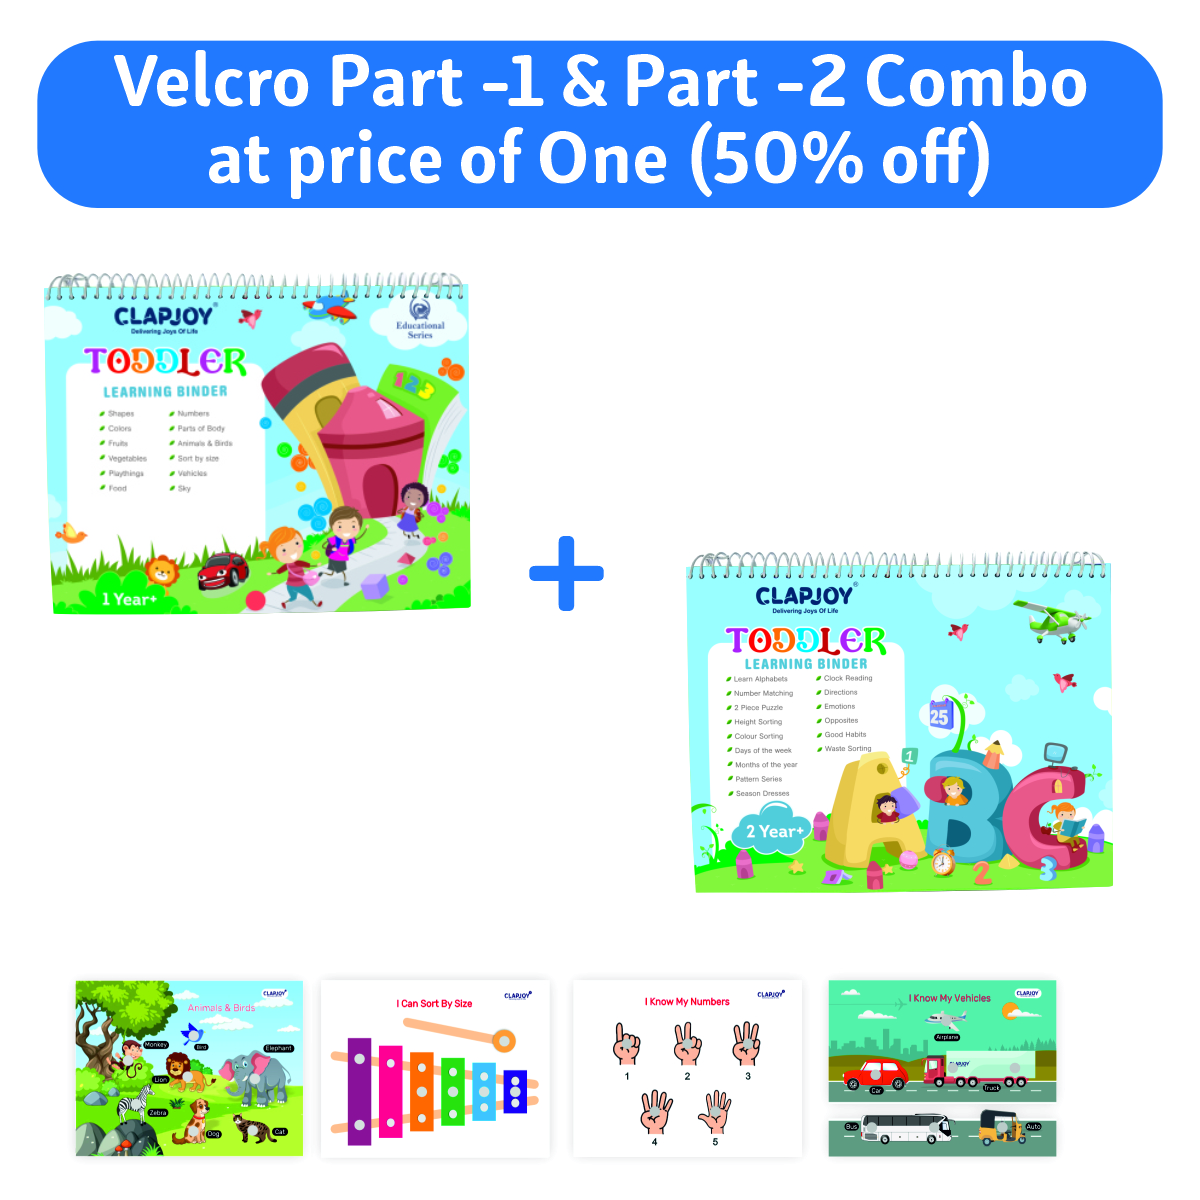 Clapjoy velcro book (Buy Level 1 & Get Level 2 Free) (275+ Activities for Kids)